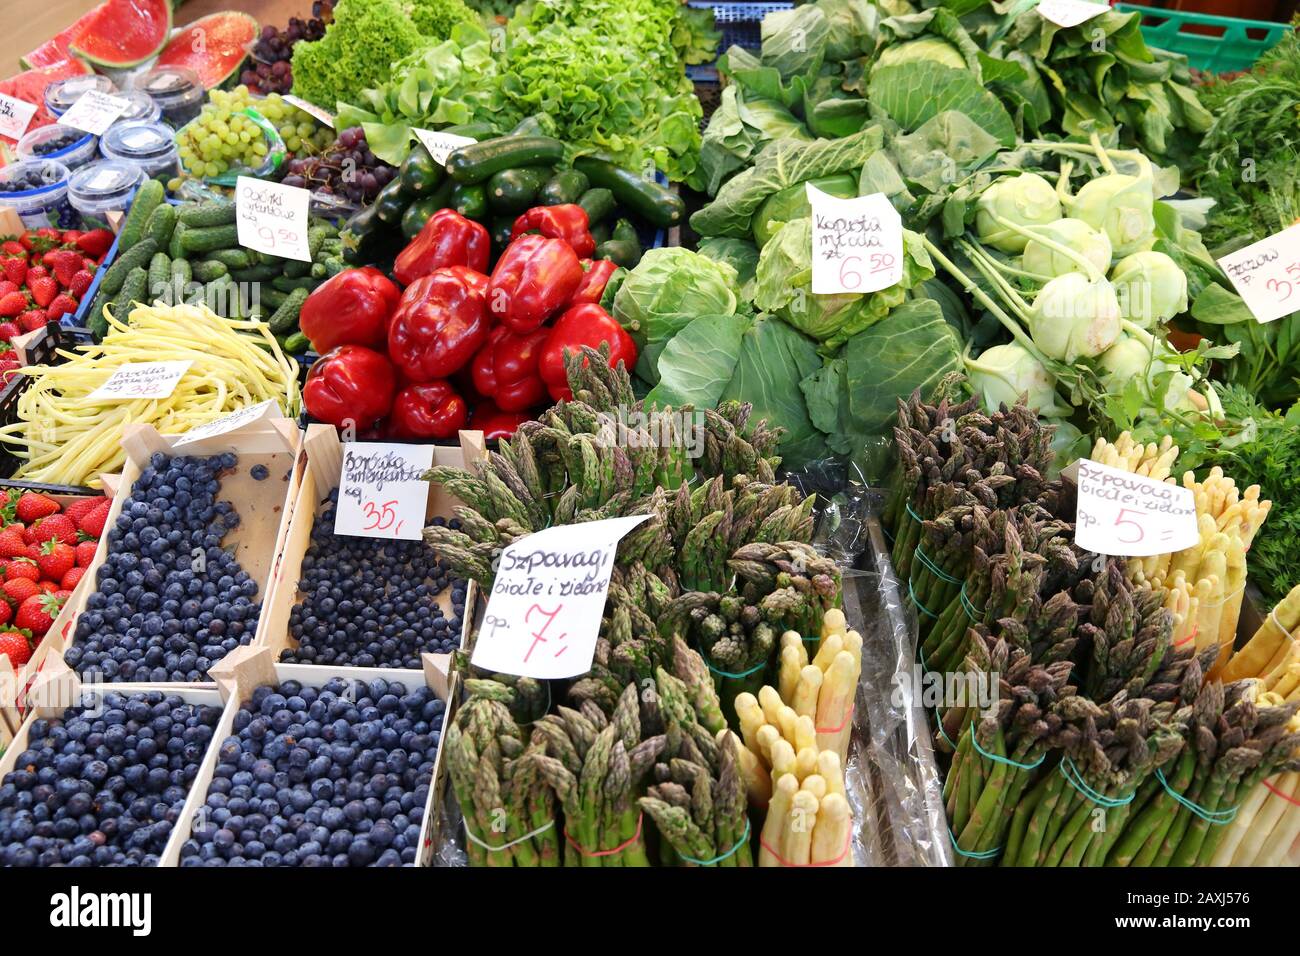 Food marketplace in Poland - Wroclaw Market Hall vegetables and fruit. Stock Photo